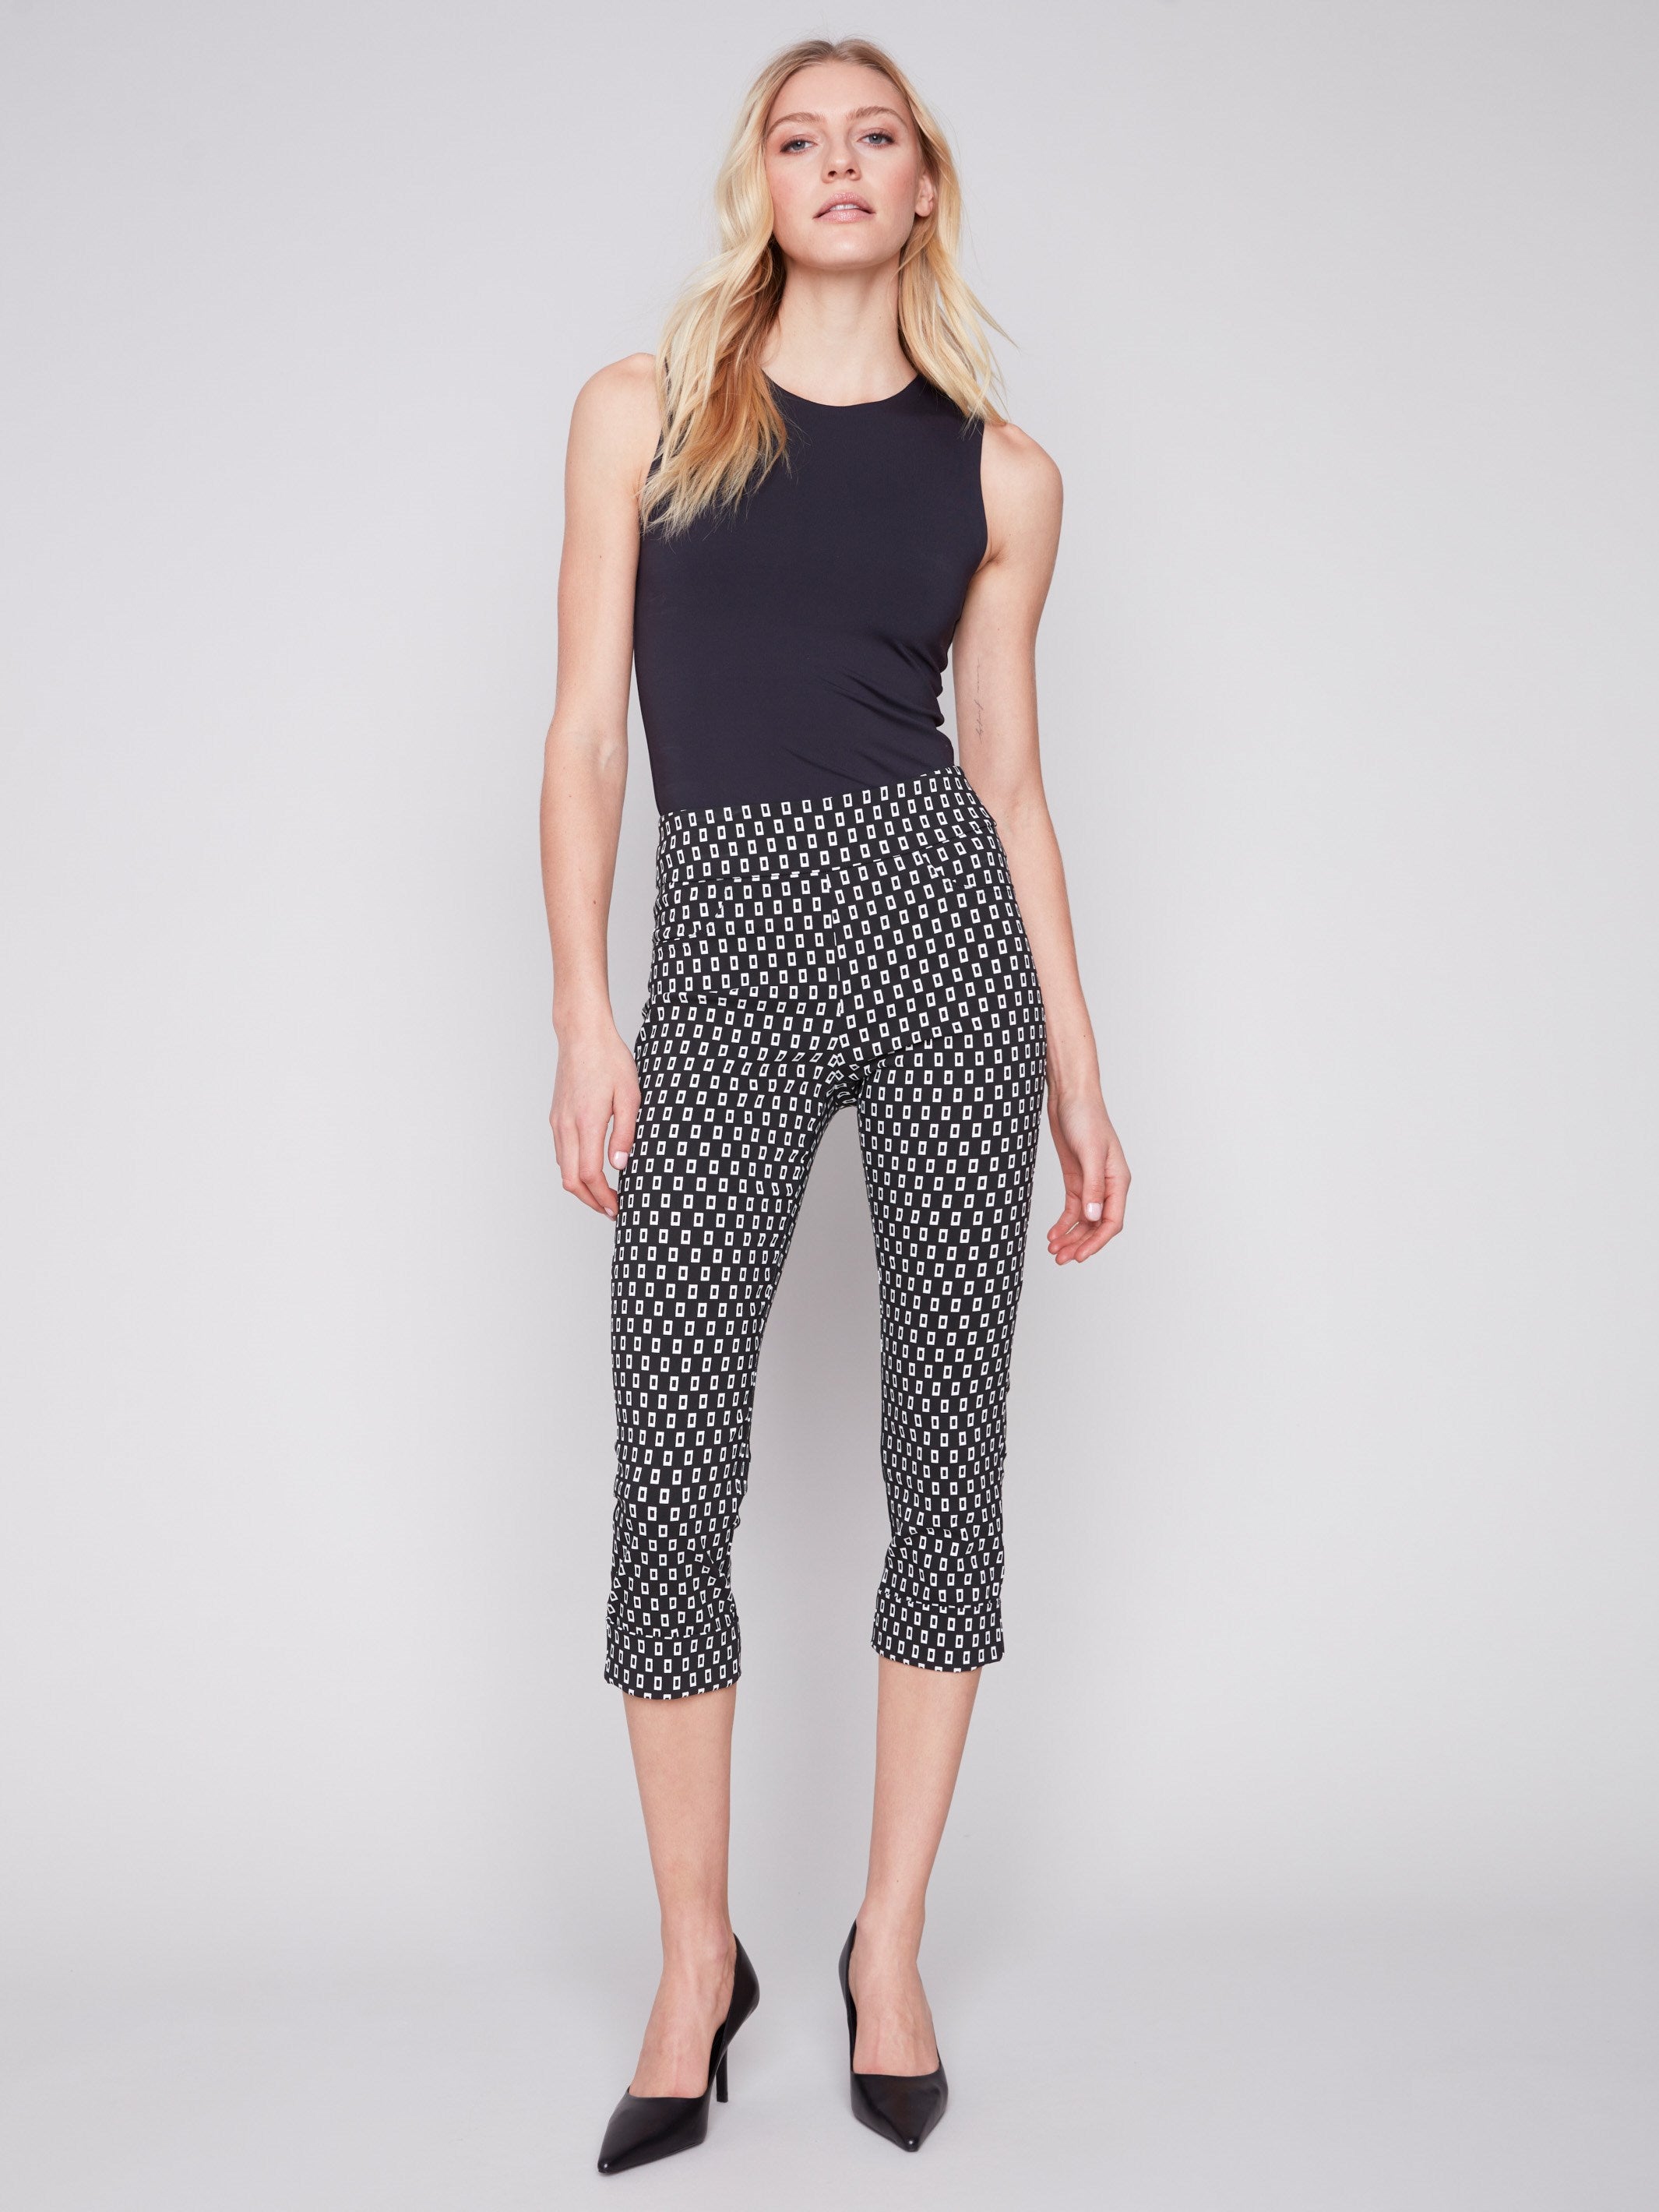 Printed Stretch Pull-On Capri Pants - White Tiles - Charlie B Collection Canada - Image 1